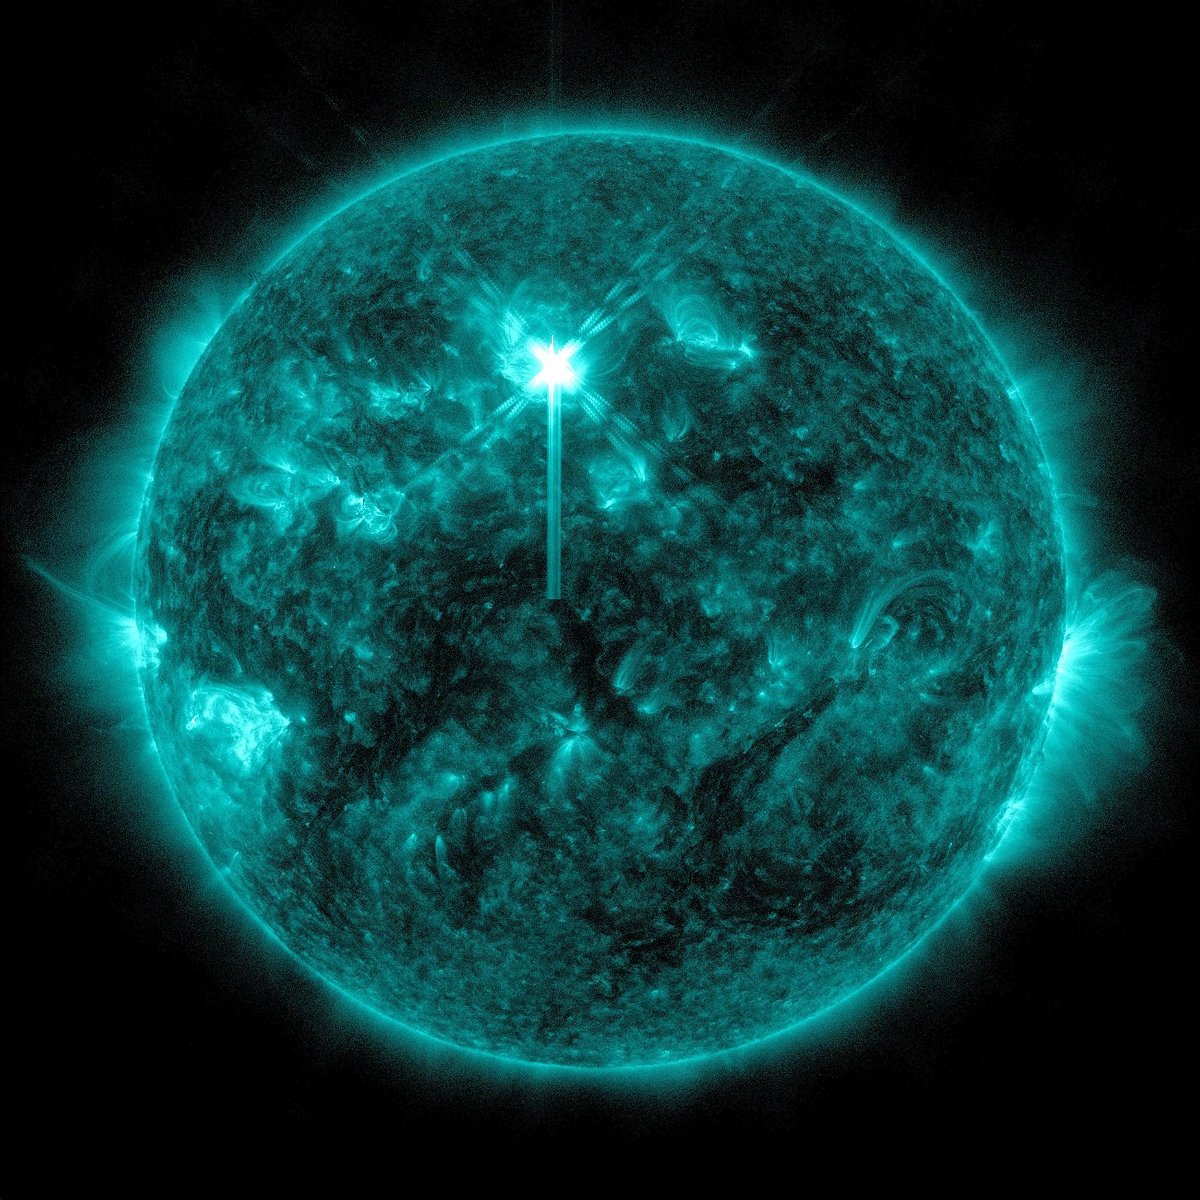 <i>NASA/SDO via CNN Newsource</i><br/>NASA’s Solar Dynamics Observatory captured this image of a solar flare in extreme ultraviolet light on May 2. The flare is the bright flash toward the upper middle area of the sun.